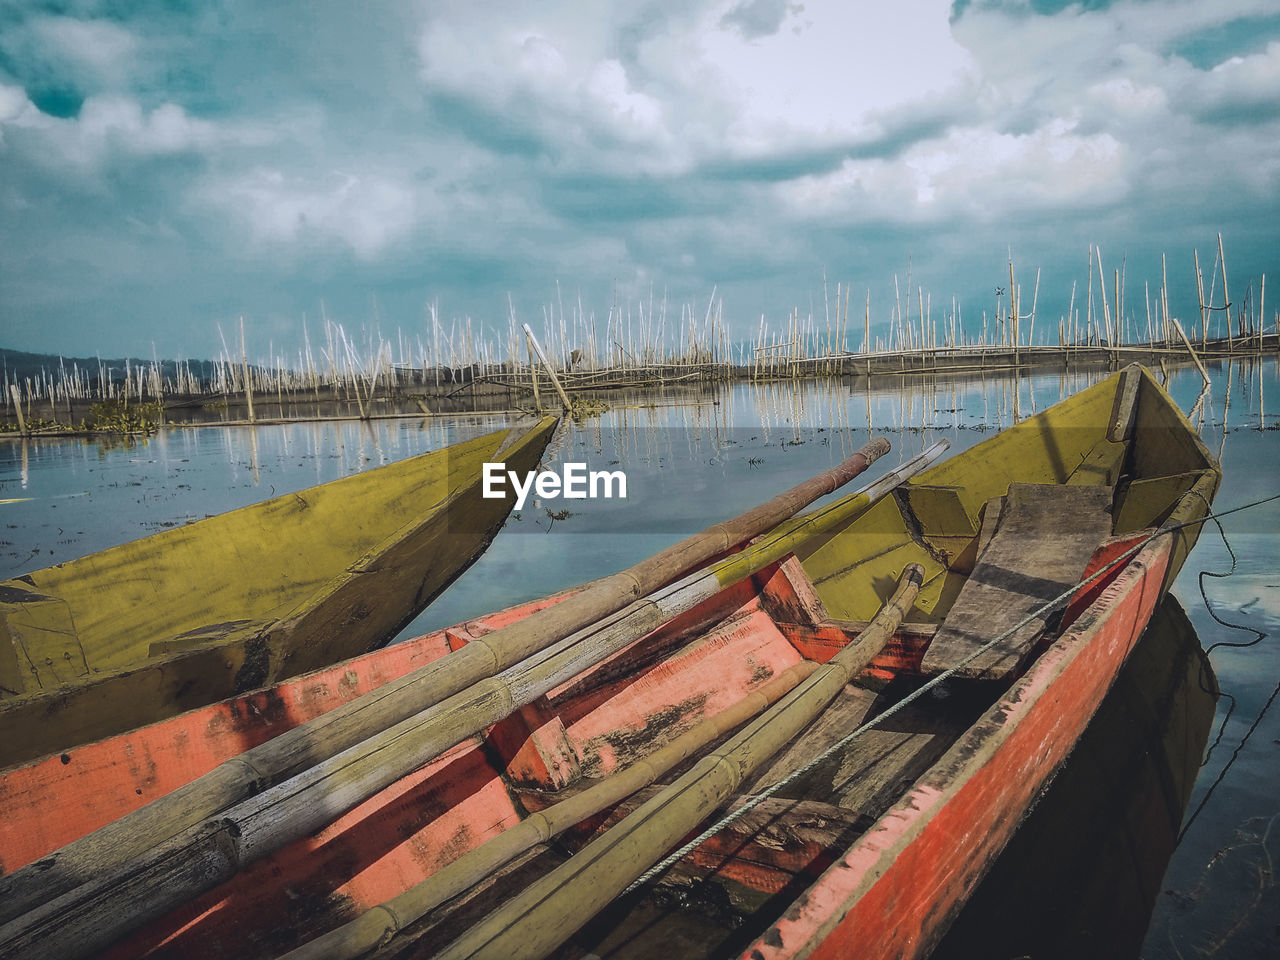 PANORAMIC VIEW OF FISHING BOATS MOORED AT LAKE AGAINST SKY